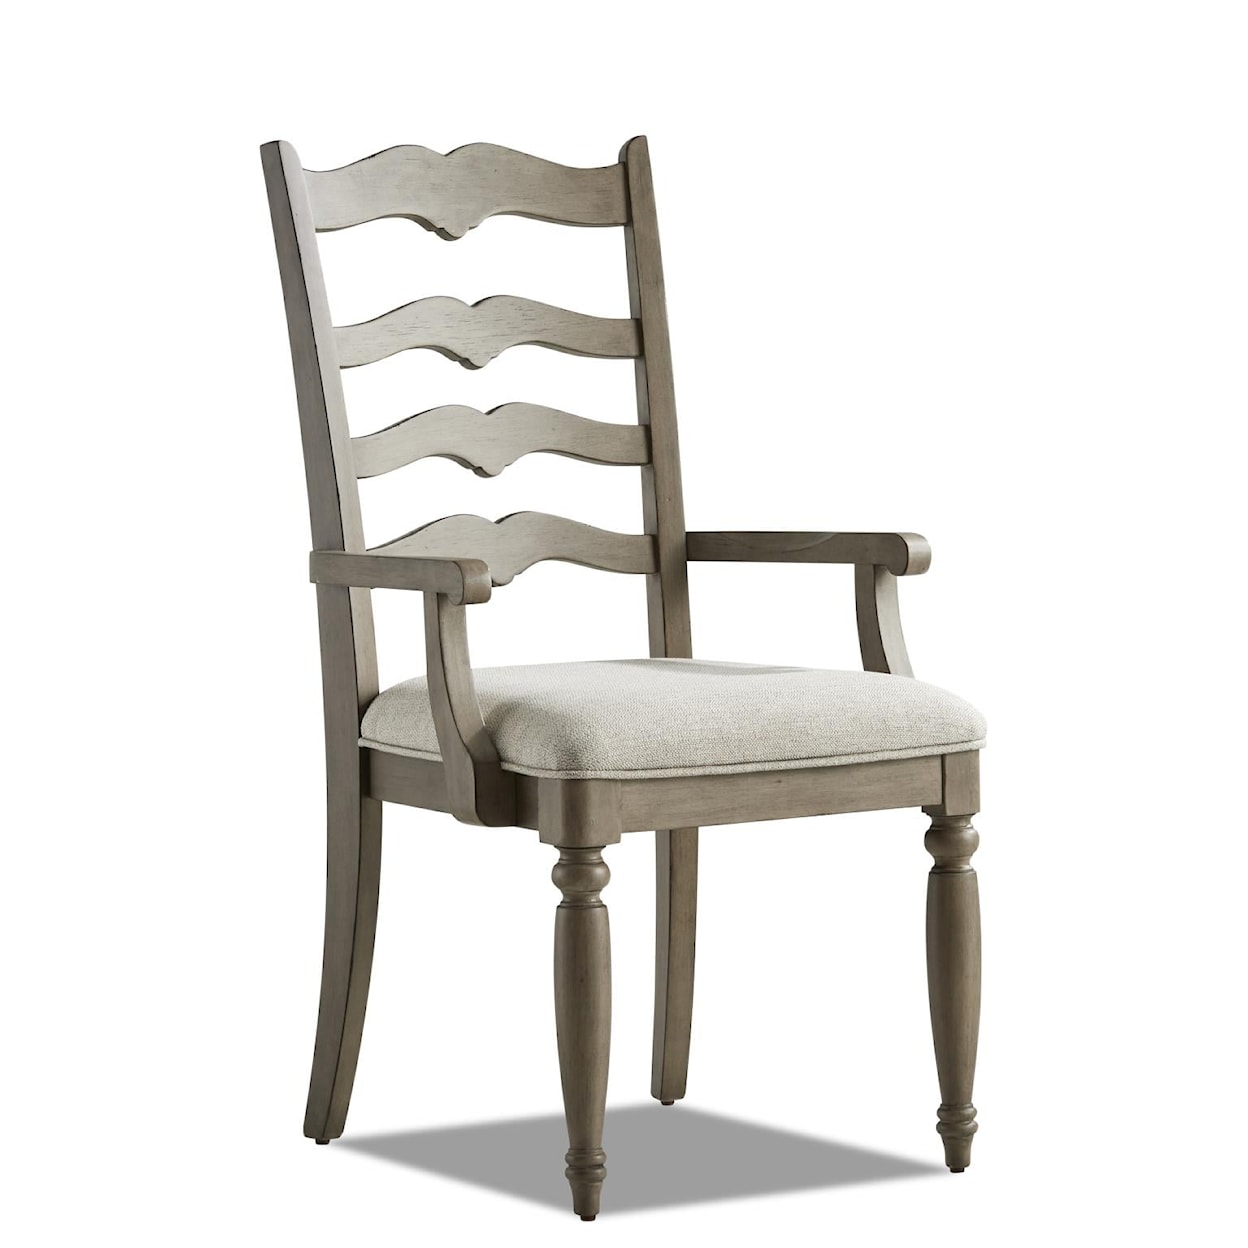 Trisha Yearwood Home Collection by Legacy Classic Nashville Ladderback Arm Chair